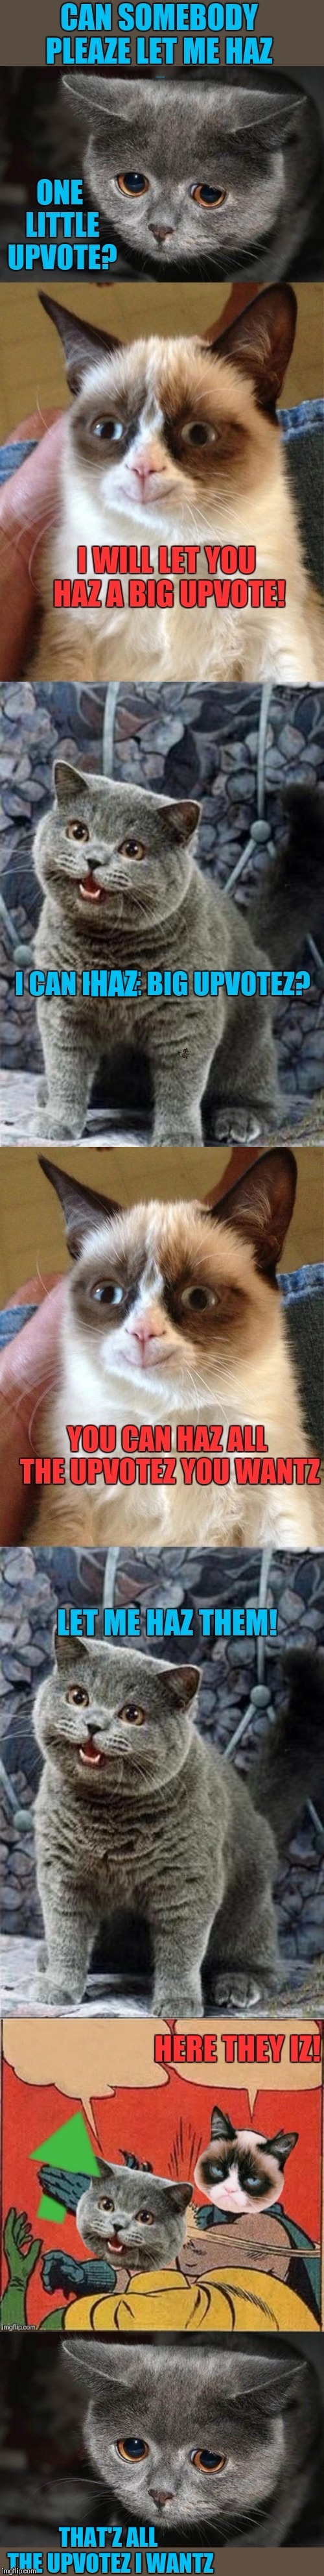 Plz let me haz upvotes | image tagged in grumpy cat,i can has cheezburger cat,begging for upvotes,upvotes,44colt | made w/ Imgflip meme maker